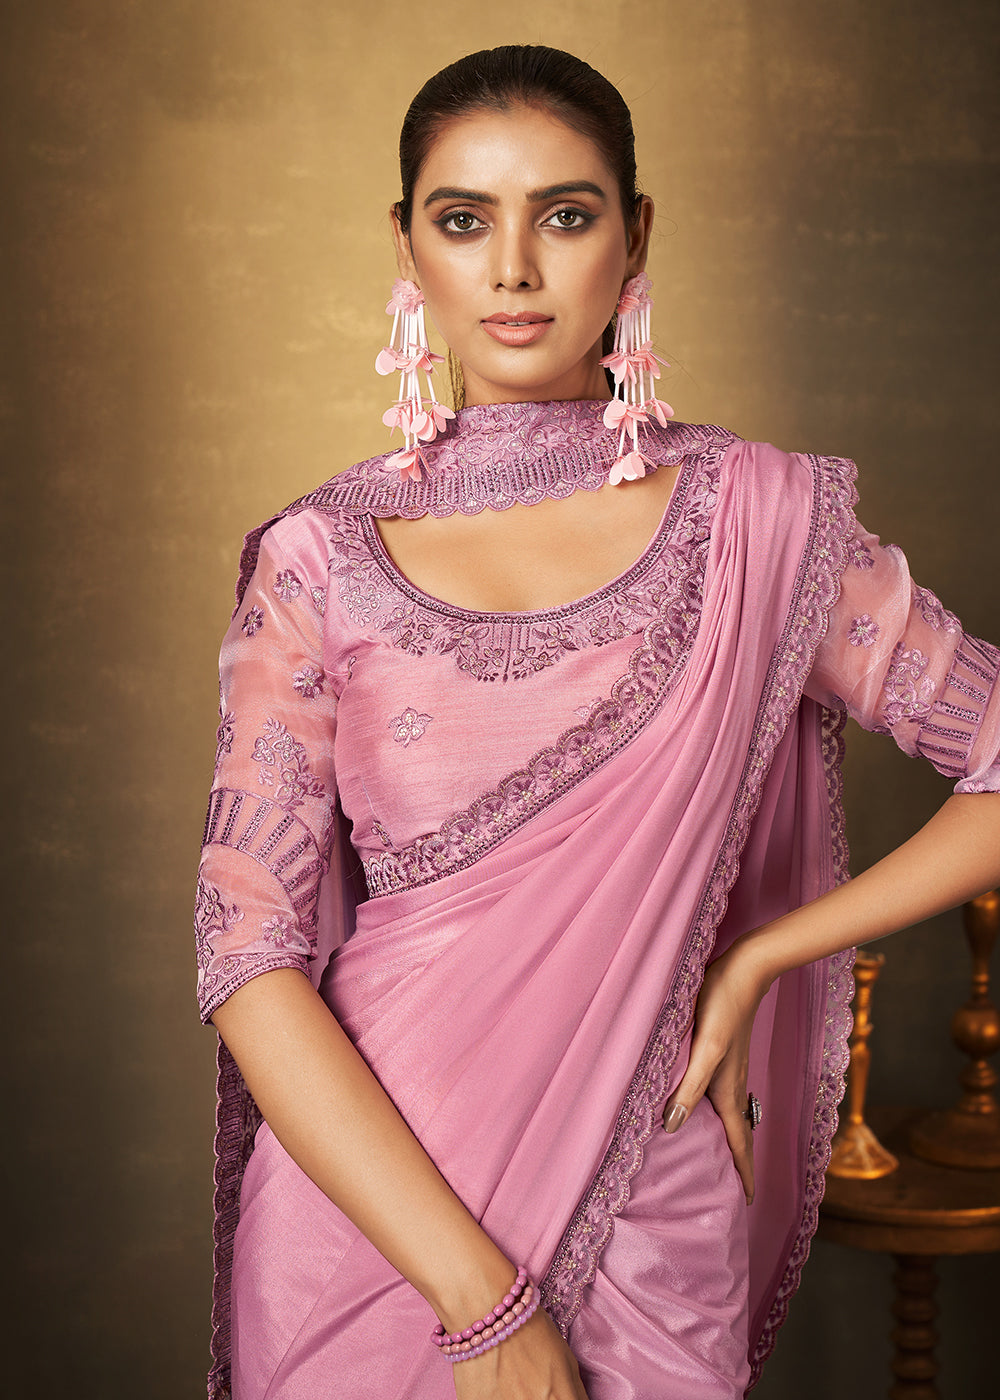 Buy Now Mandys Pink Crepe Georgette Silk Designer Saree Online in USA, UK, Canada & Worldwide at Empress Clothing. 